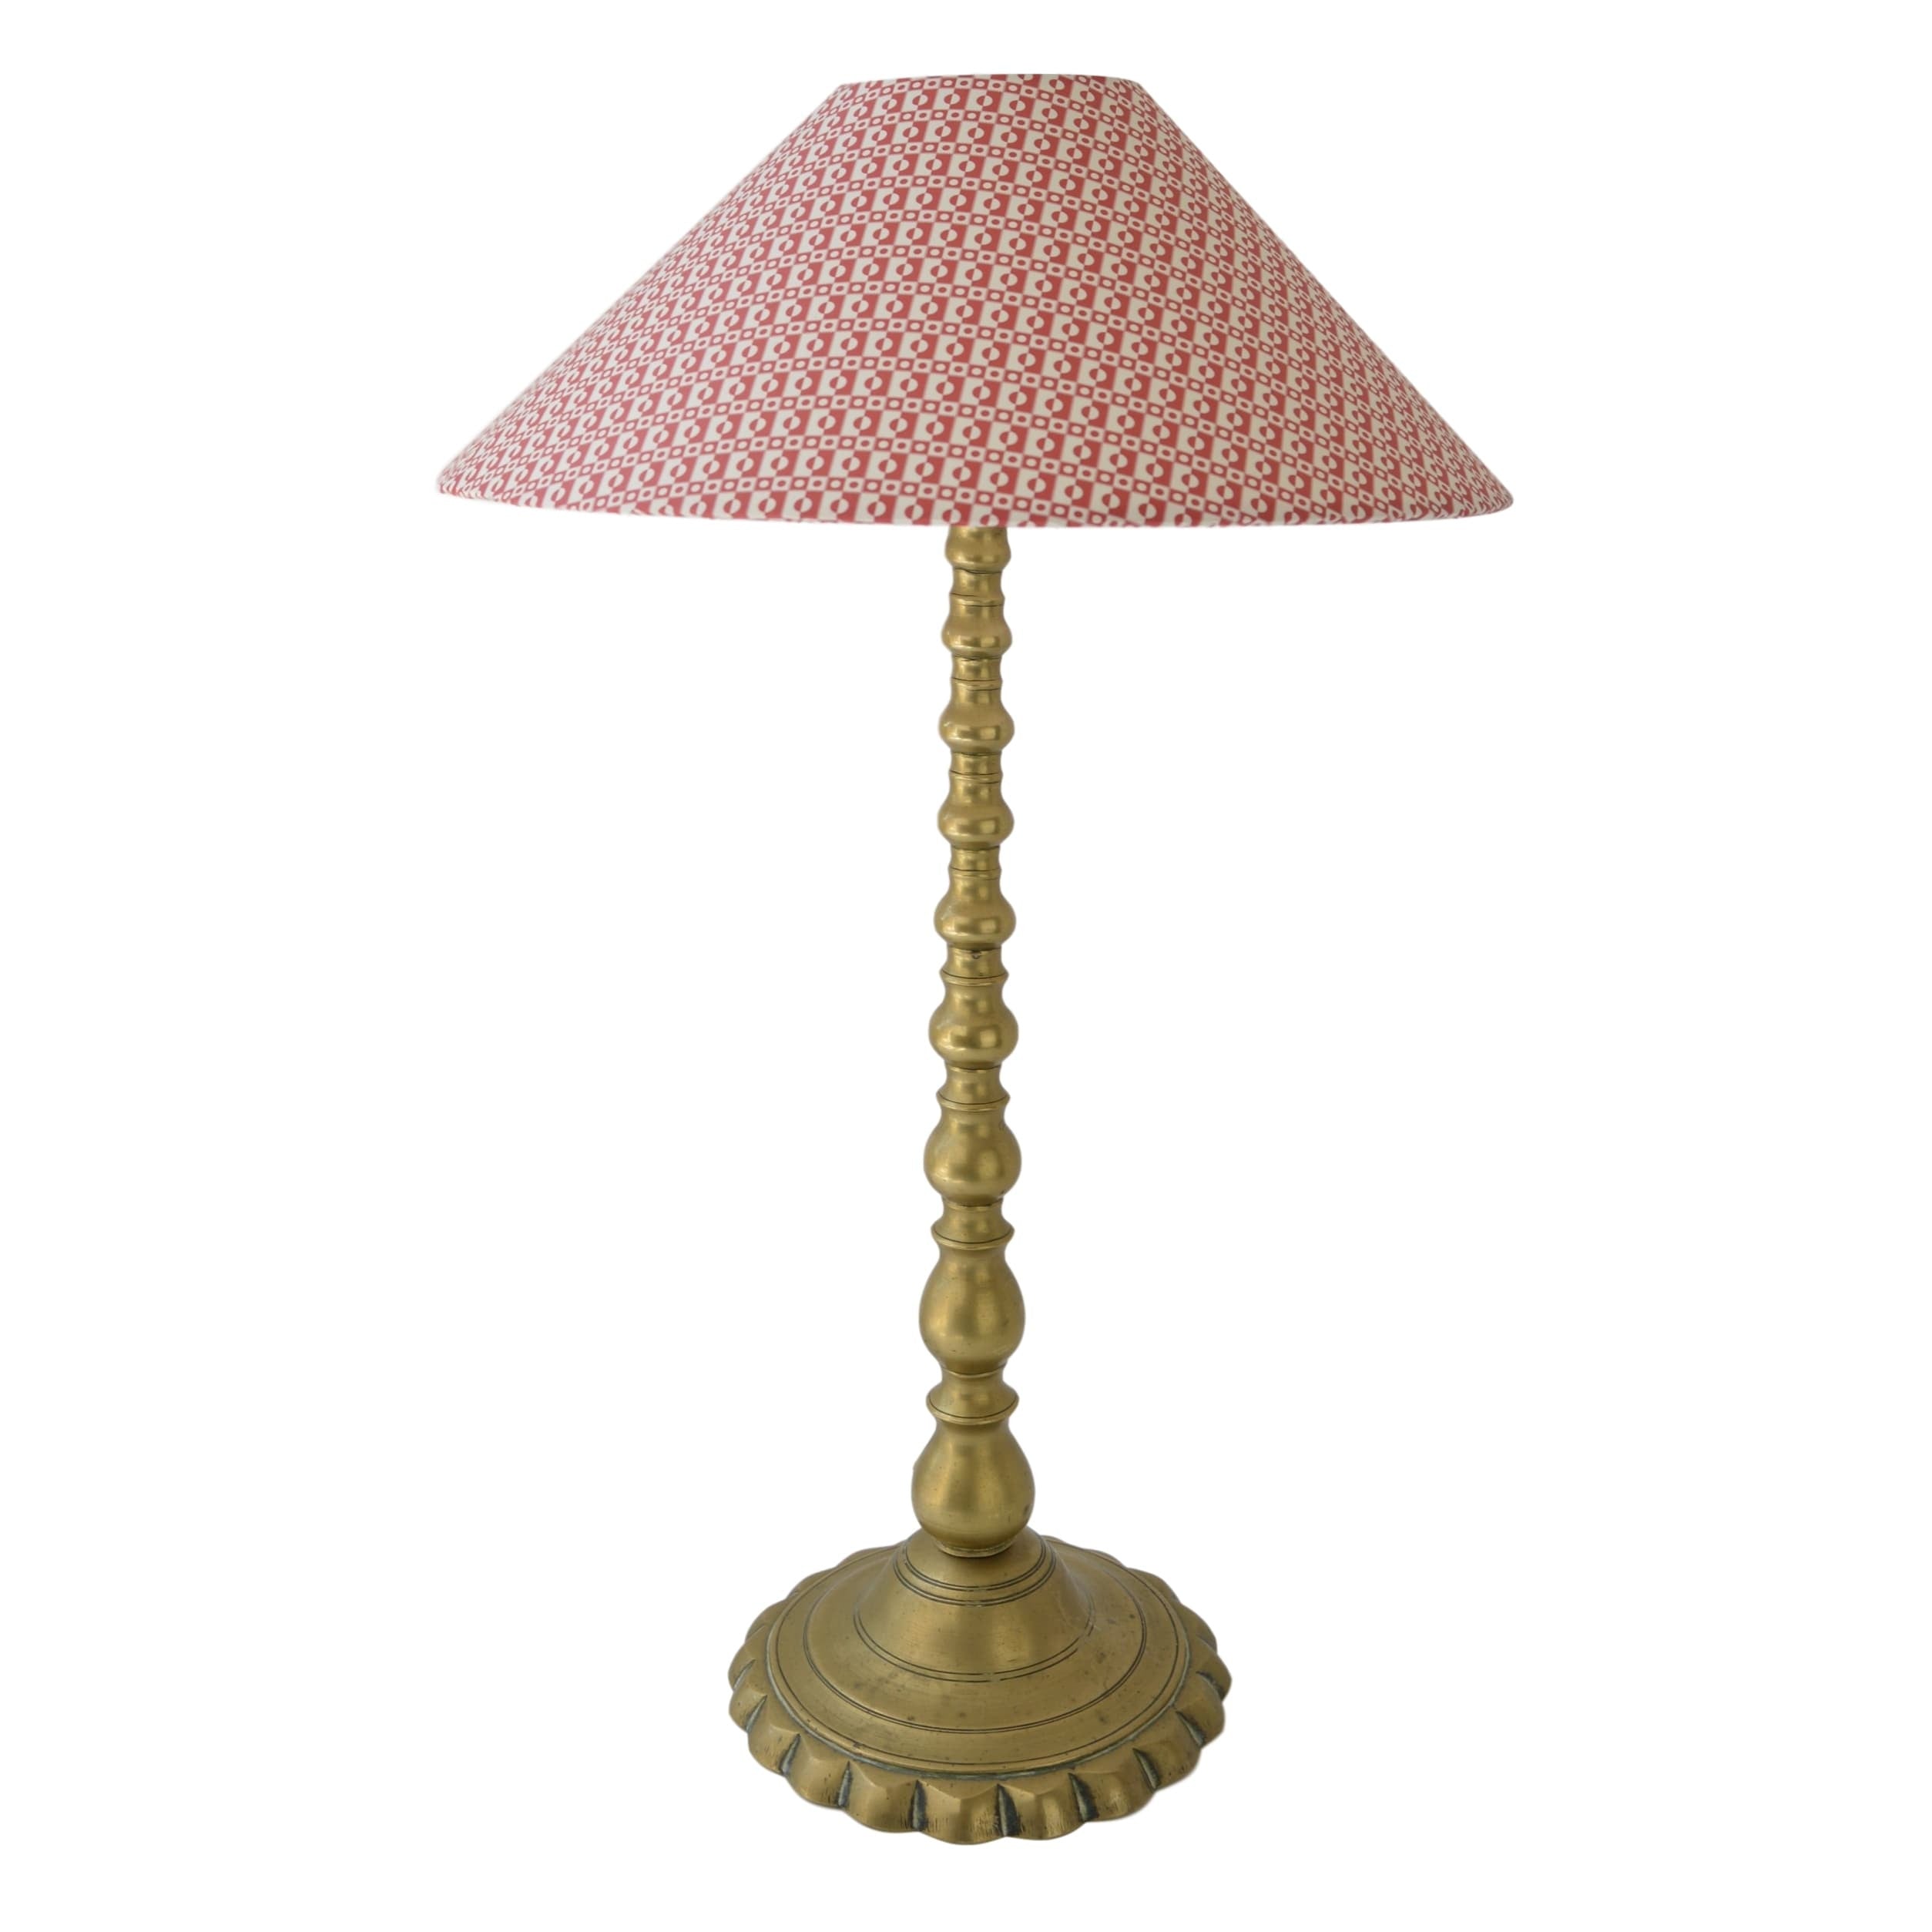 Munro and Kerr brass table lamp 